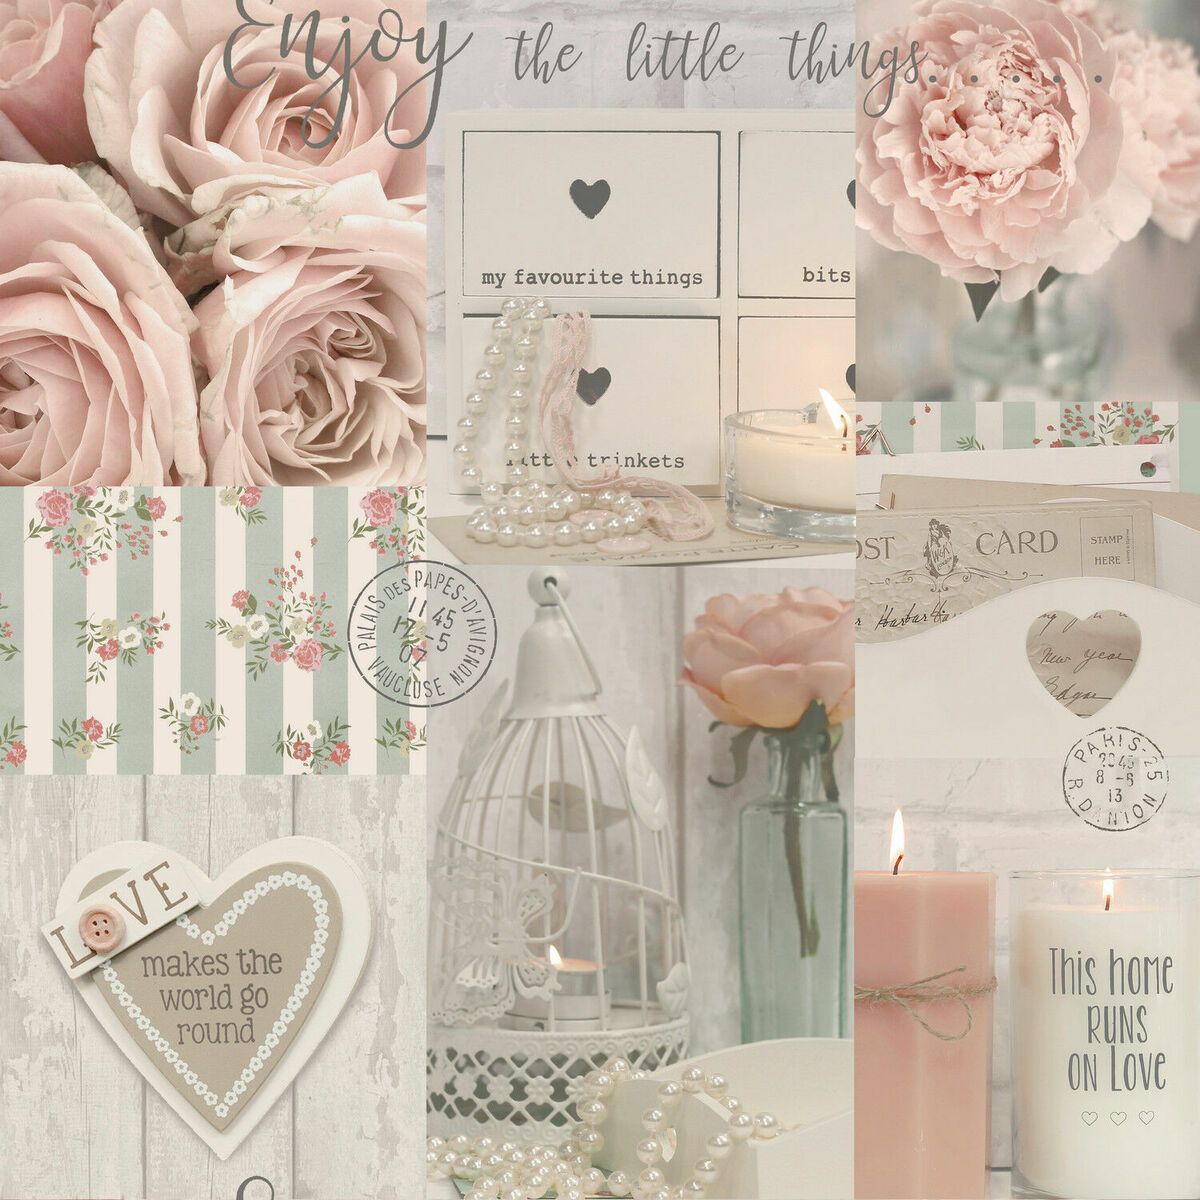 A collage of shabby chic style items including candles, roses and a birdcage - Coquette